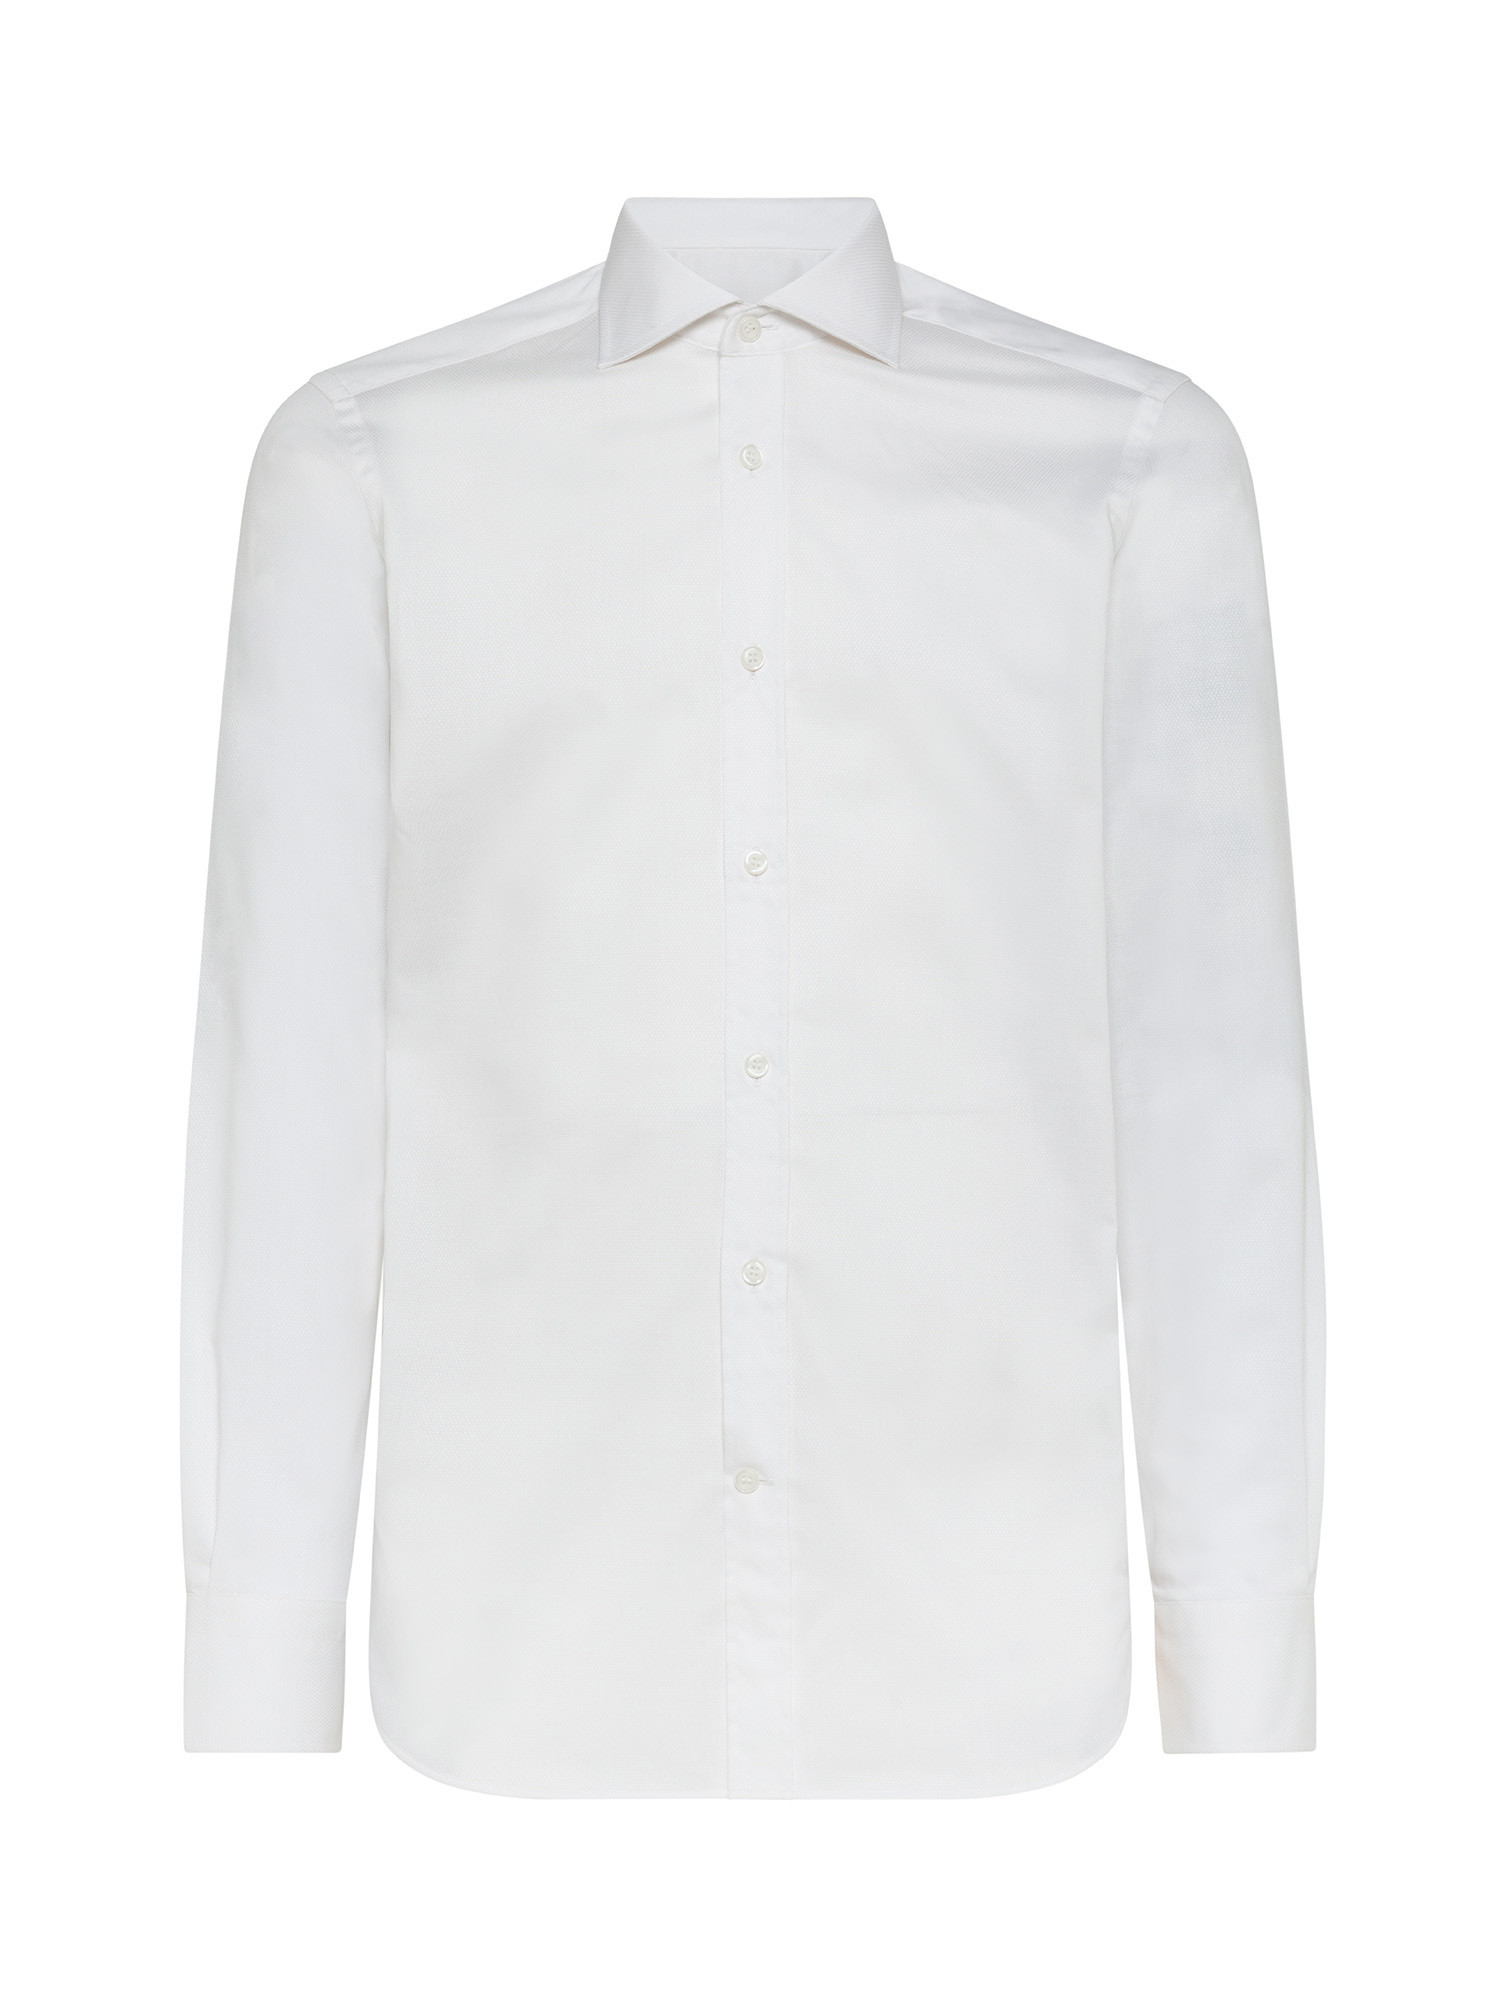 Luca D'Altieri - Slim fit shirt in stretch cotton, White, large image number 0